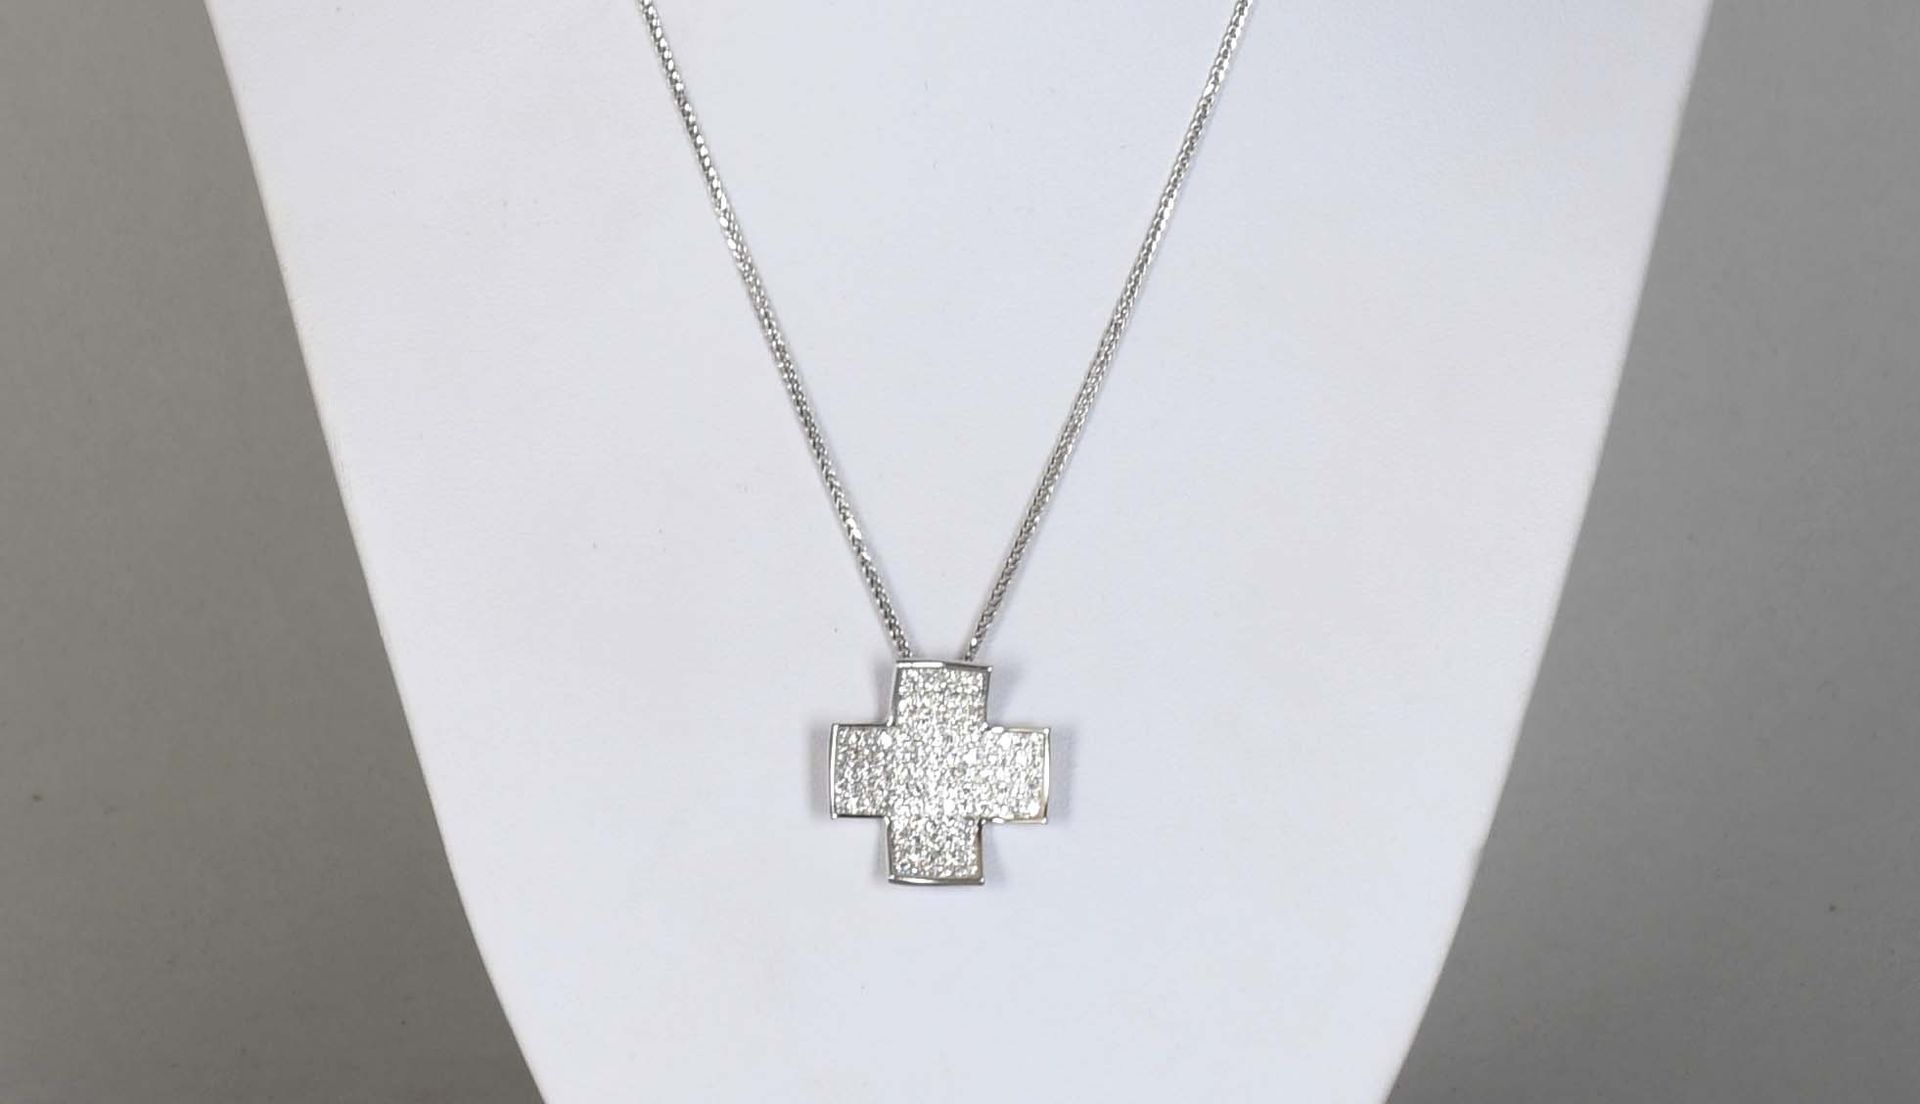 Null Jewel

Pendant in the shape of a cross, in white gold eighteen carats entir&hellip;